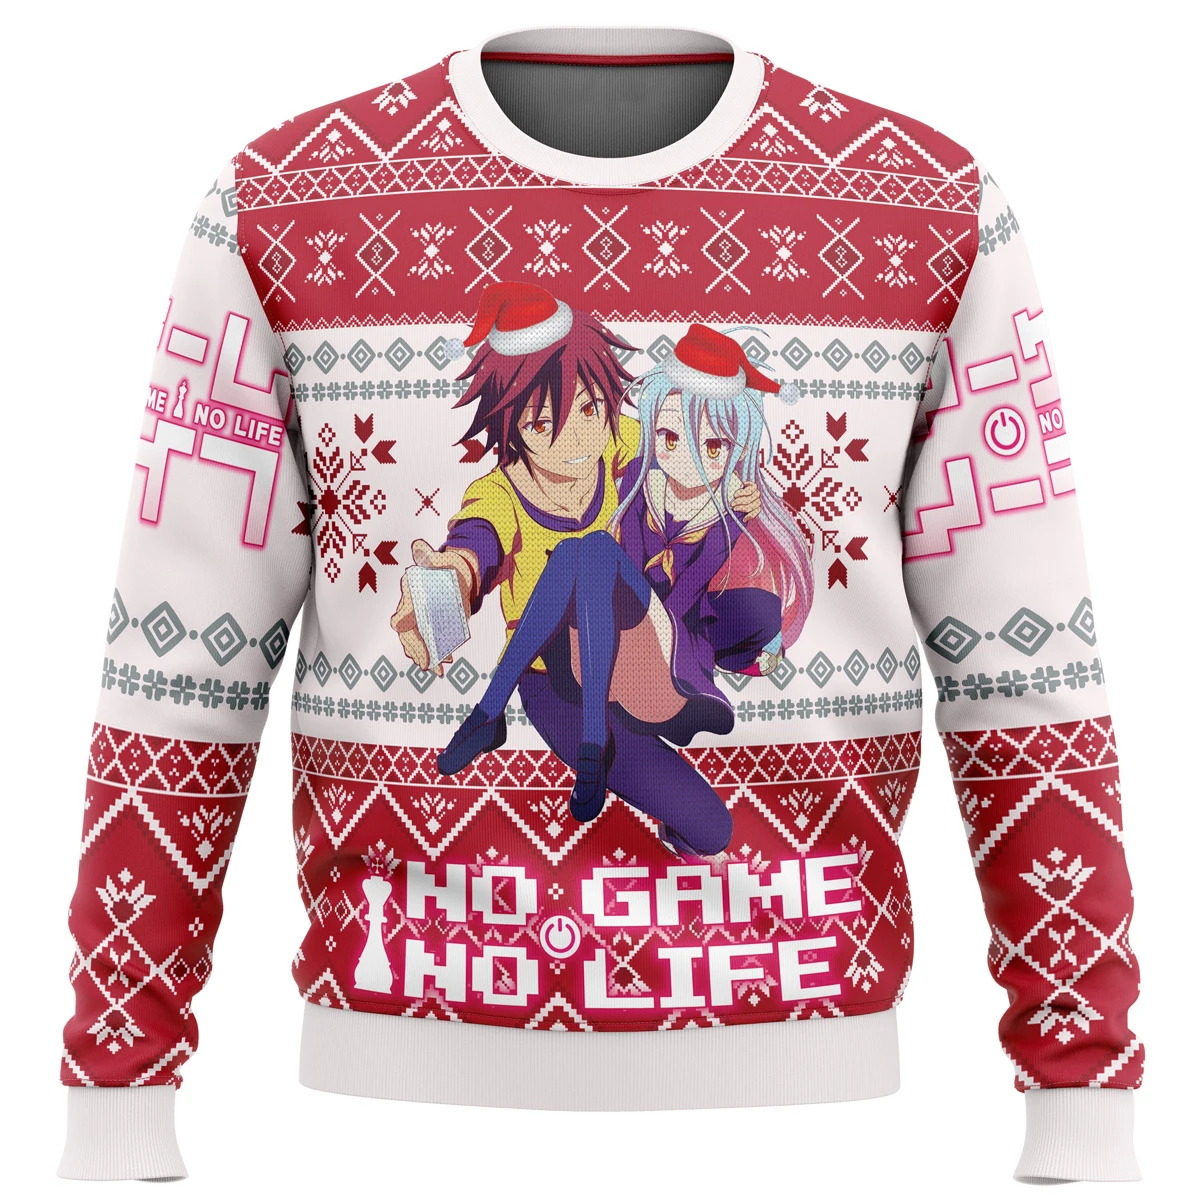 

No Game No Life Alt Ugly Christmas Sweater Christmas Sweater gift Santa Claus pullover men 3D Sweatshirt and top autumn and wint